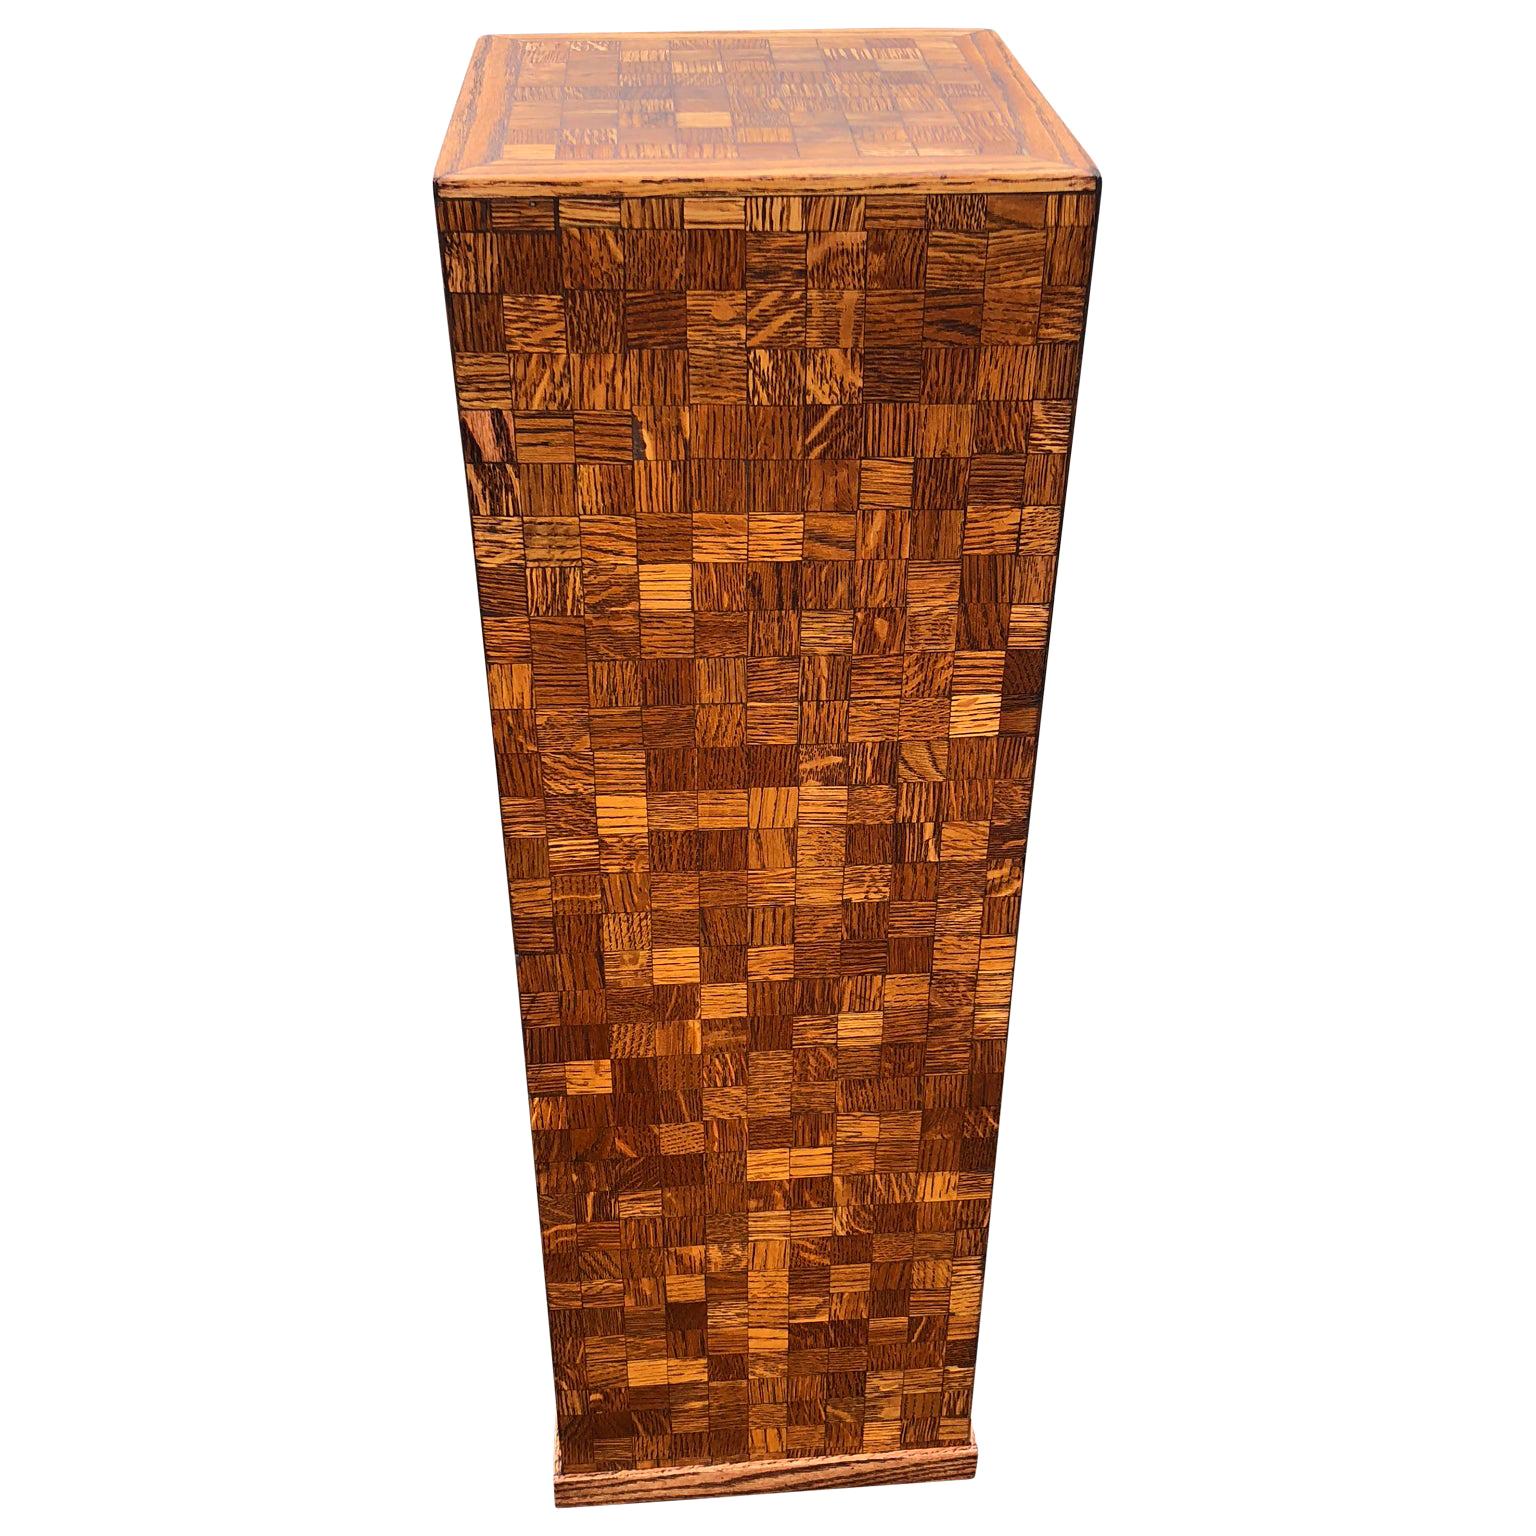 Square Mid-Century Modern Wooden Pedestal with Mosaic Wooden Tile Design